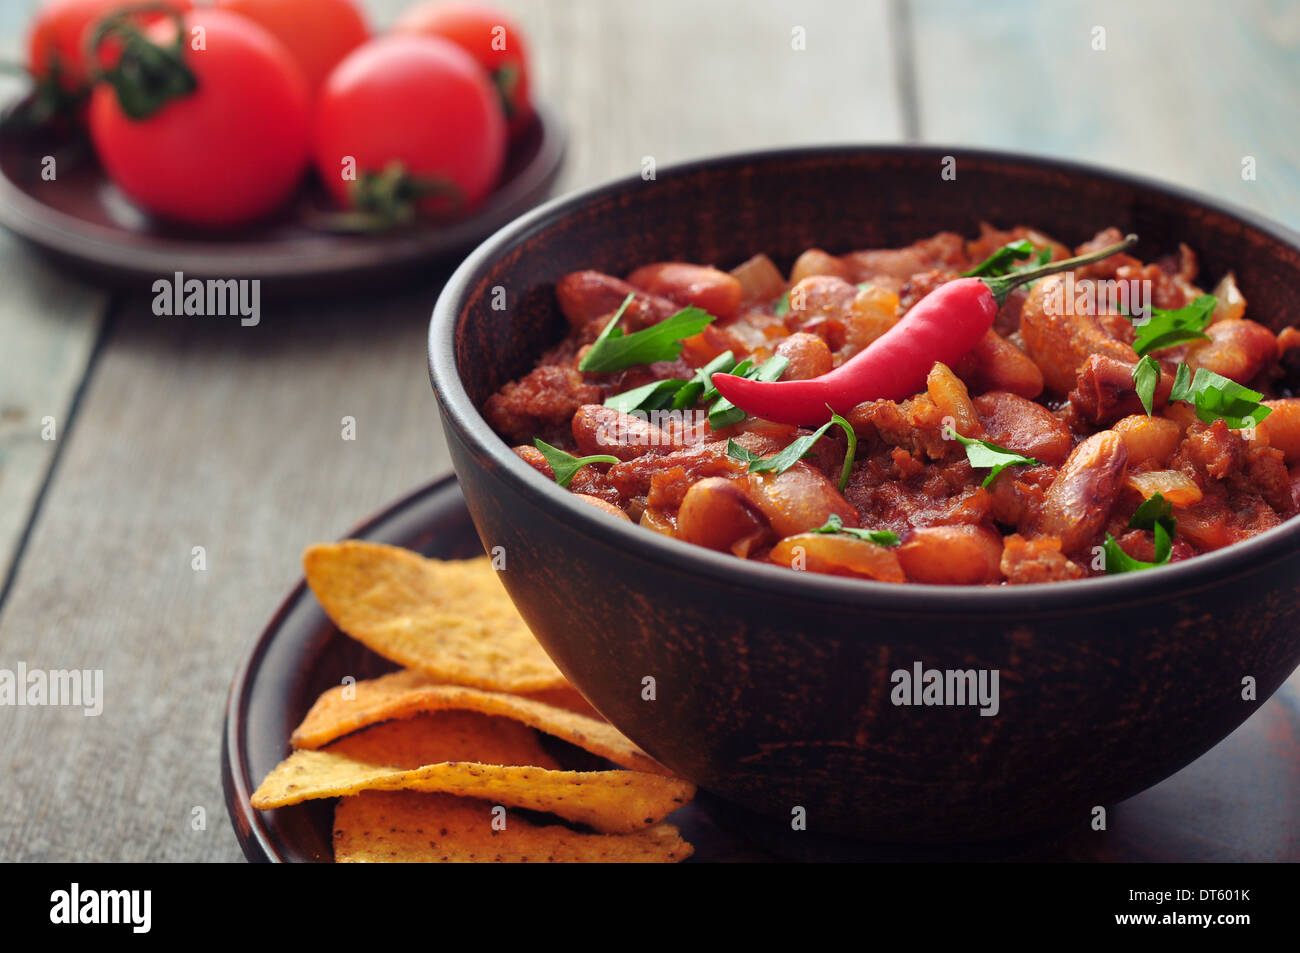 Chili Con Carne in bowl with tortilla chips on wooden background Stock Photo